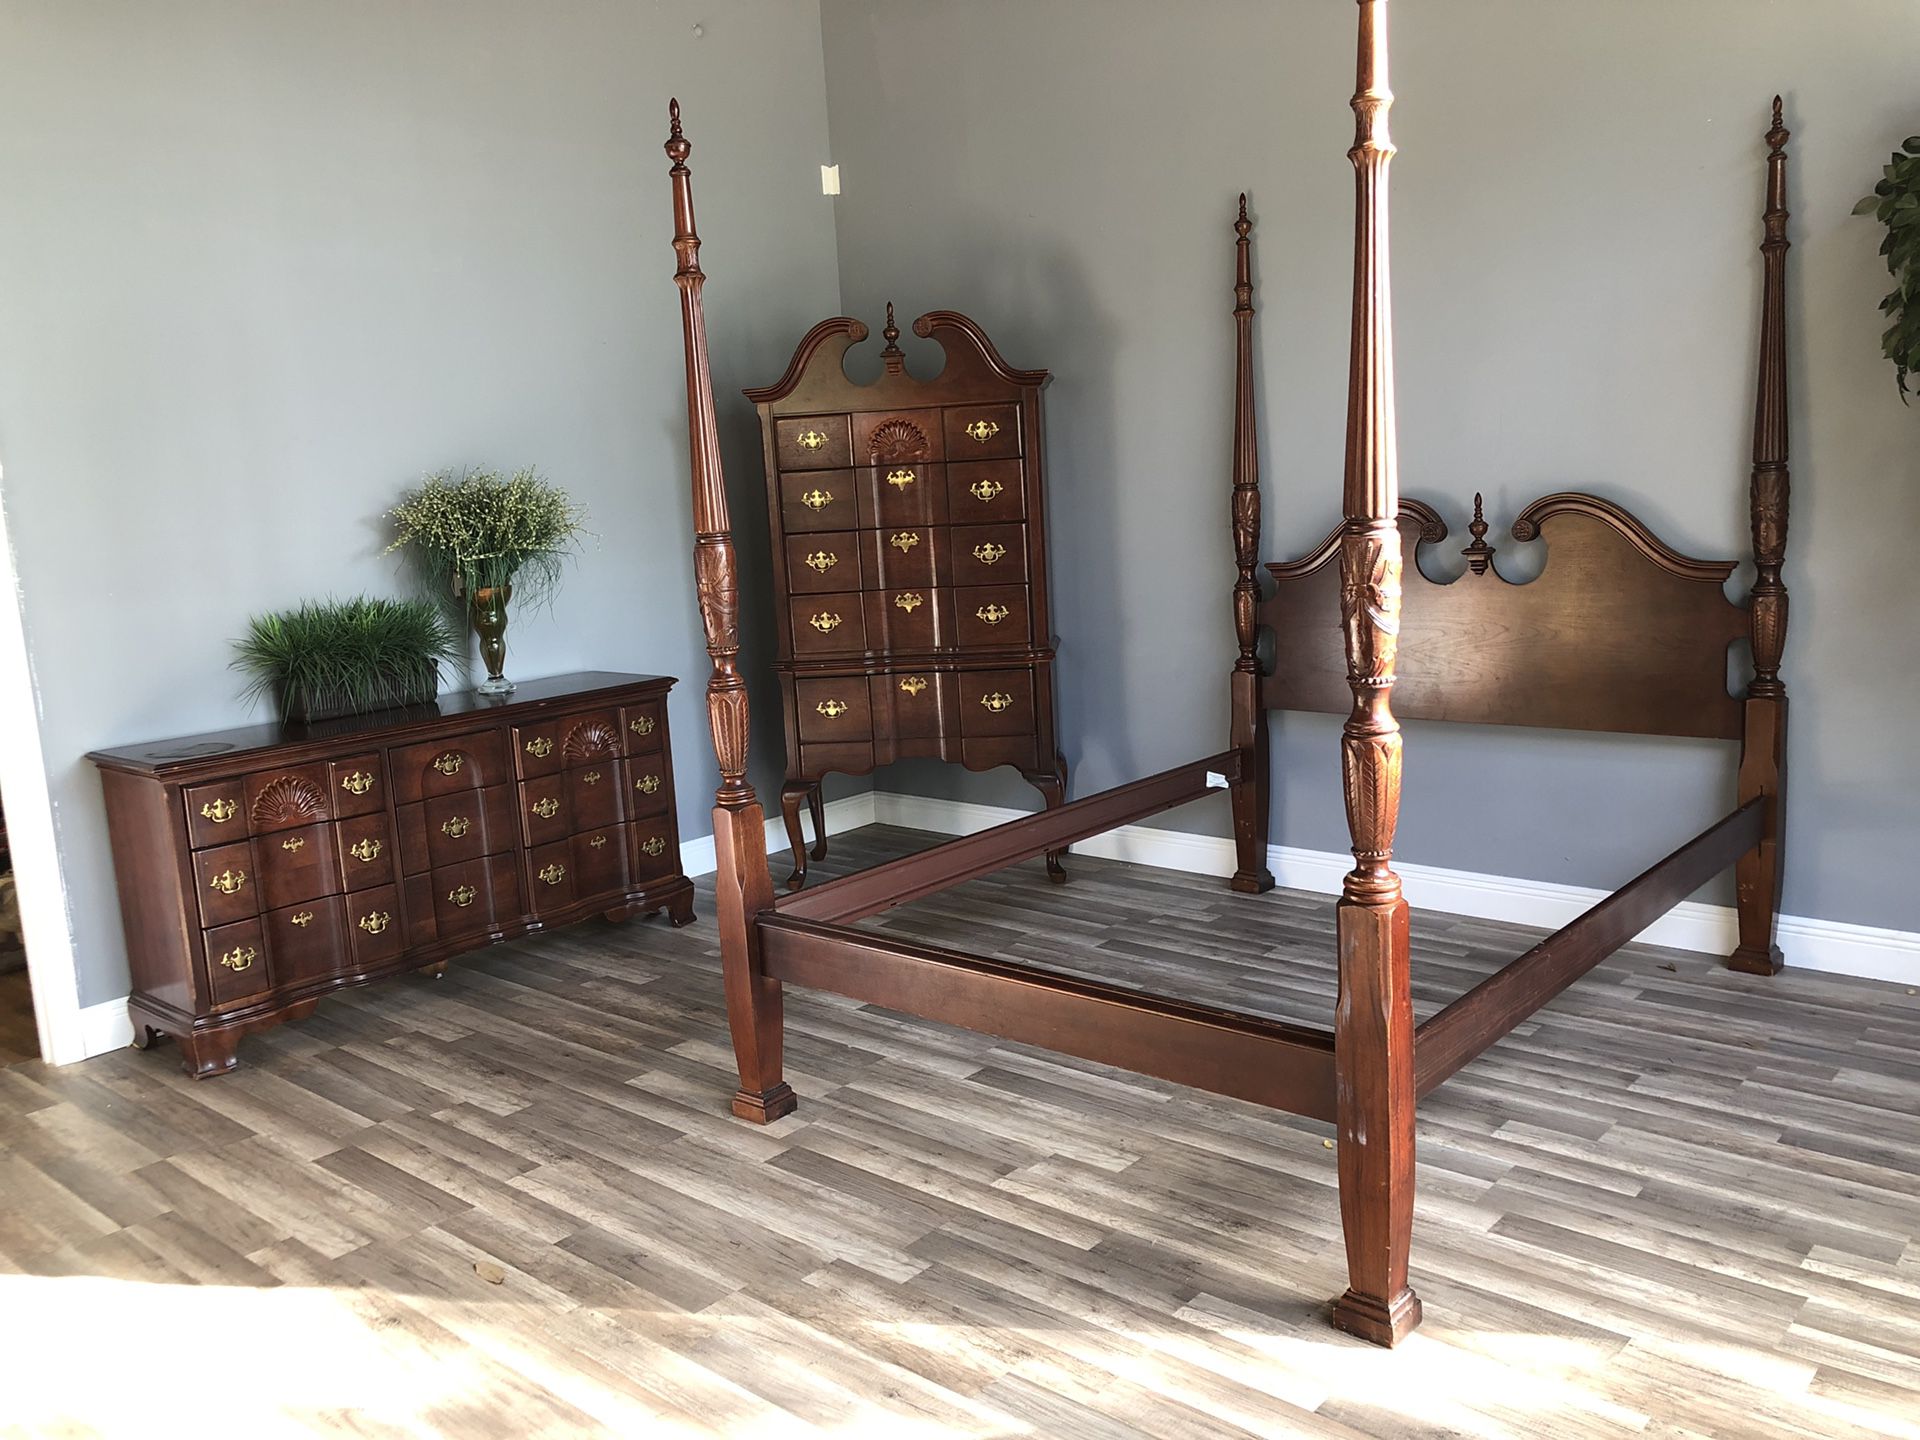 Queen Anne Style 3 Piece Bedroom Set 4 Post Poster Canopy Bed Dark Cherry Wood Comes With Long Dresser, Armoire & 4 Post Bed